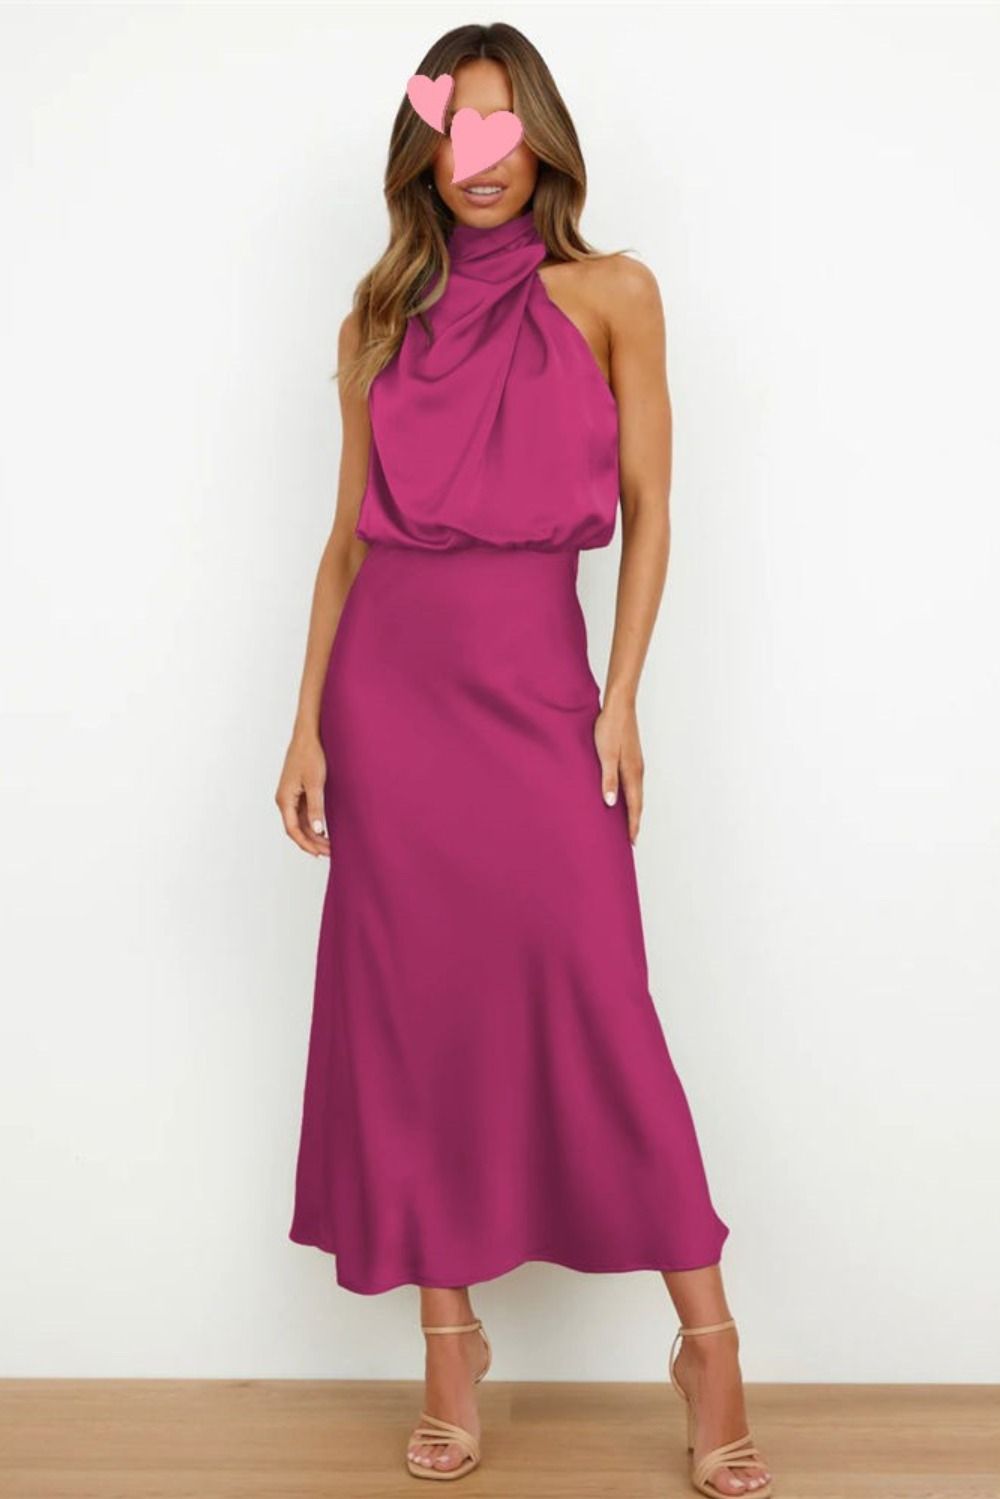 Satin Maxi Dress Outfit Ideas
  for Women